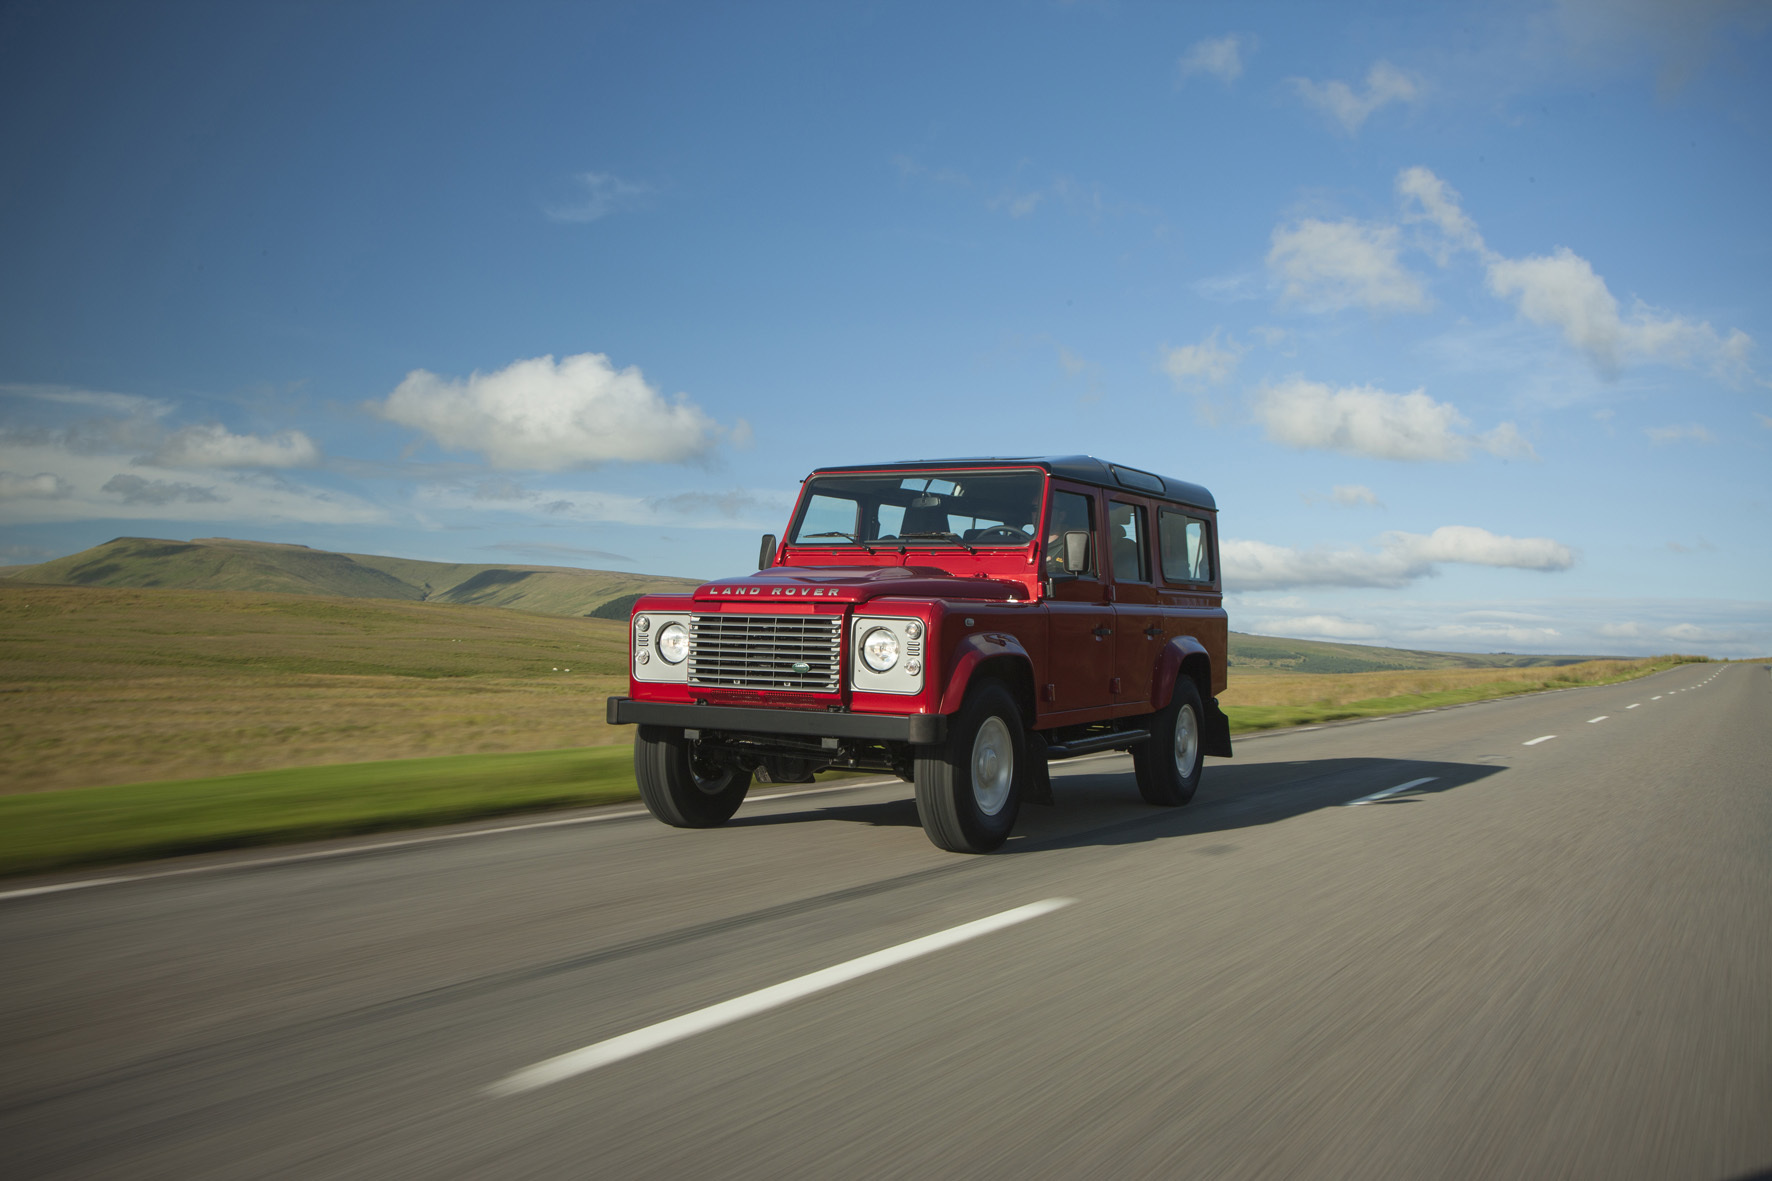 Land Rover Defenders are no longer in production